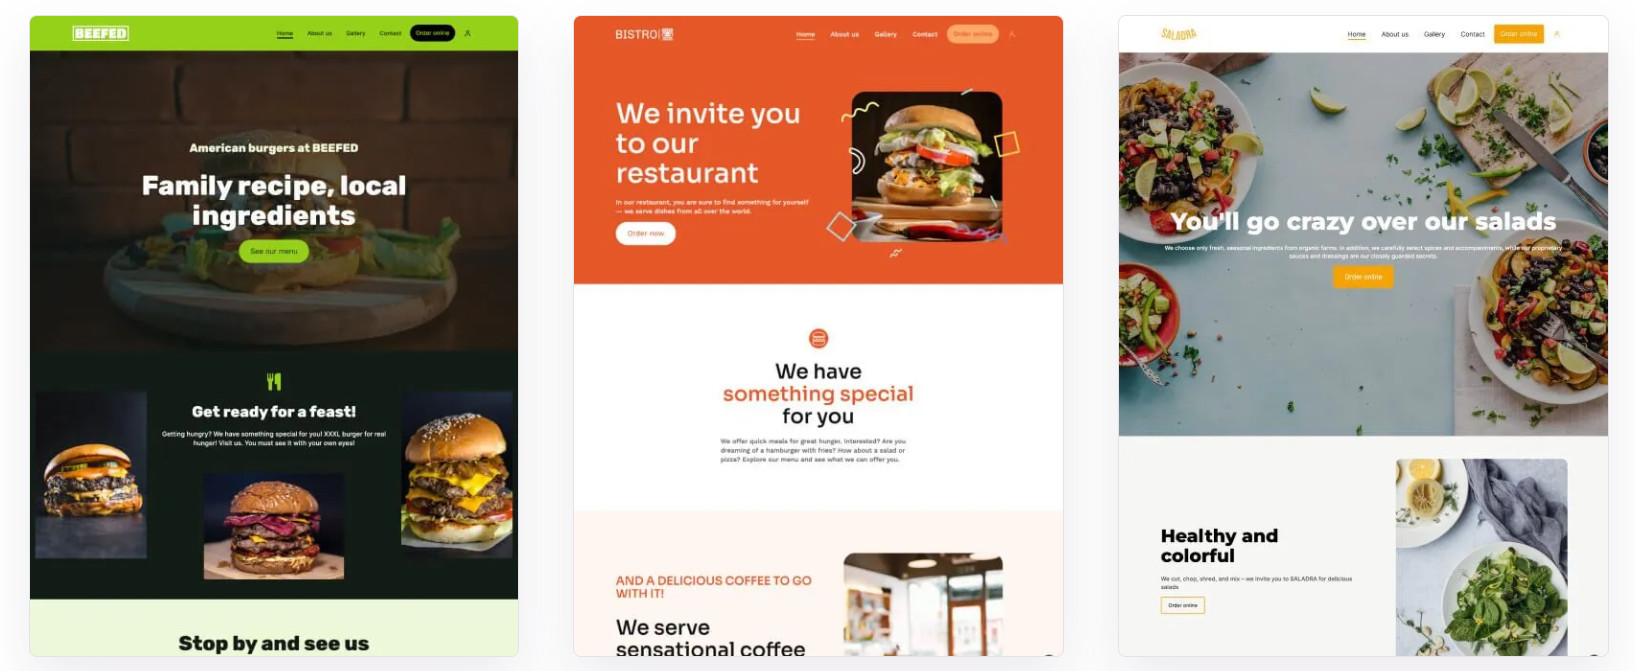 how to get more customers in my restaurant - restaurant website templates